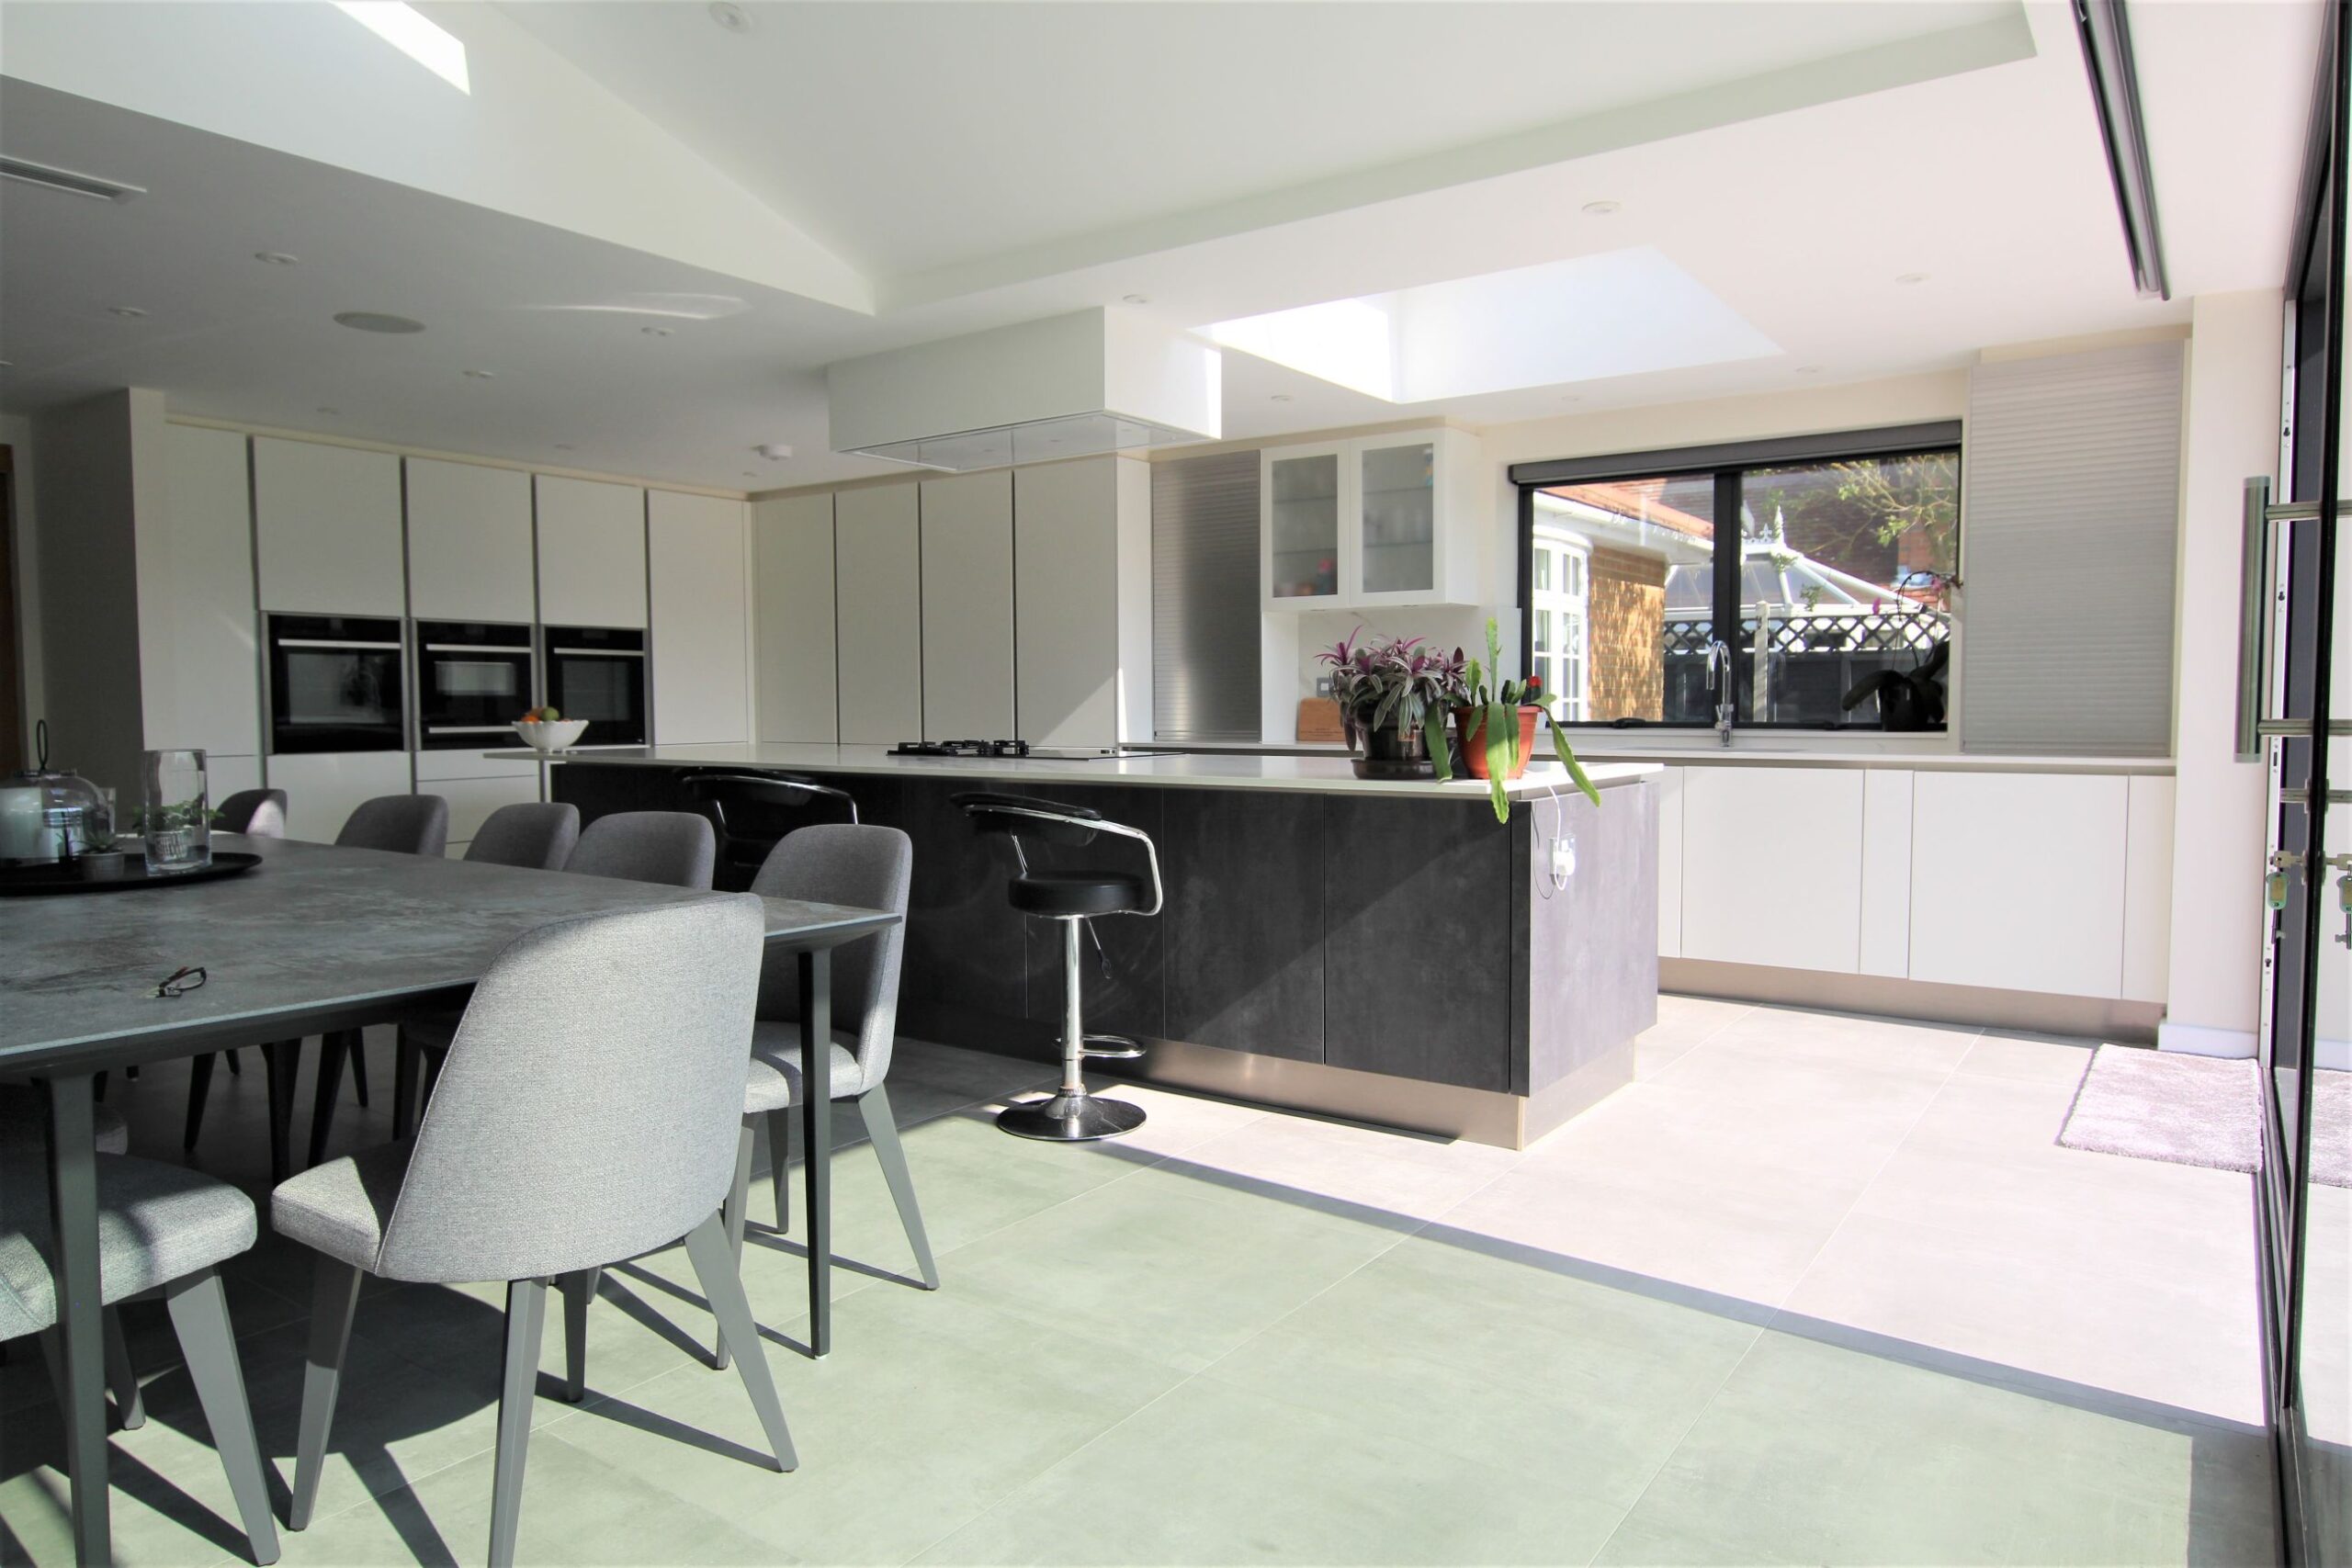 German kitchen designed, supplied and installed by Hampdens KB in Potters Bar